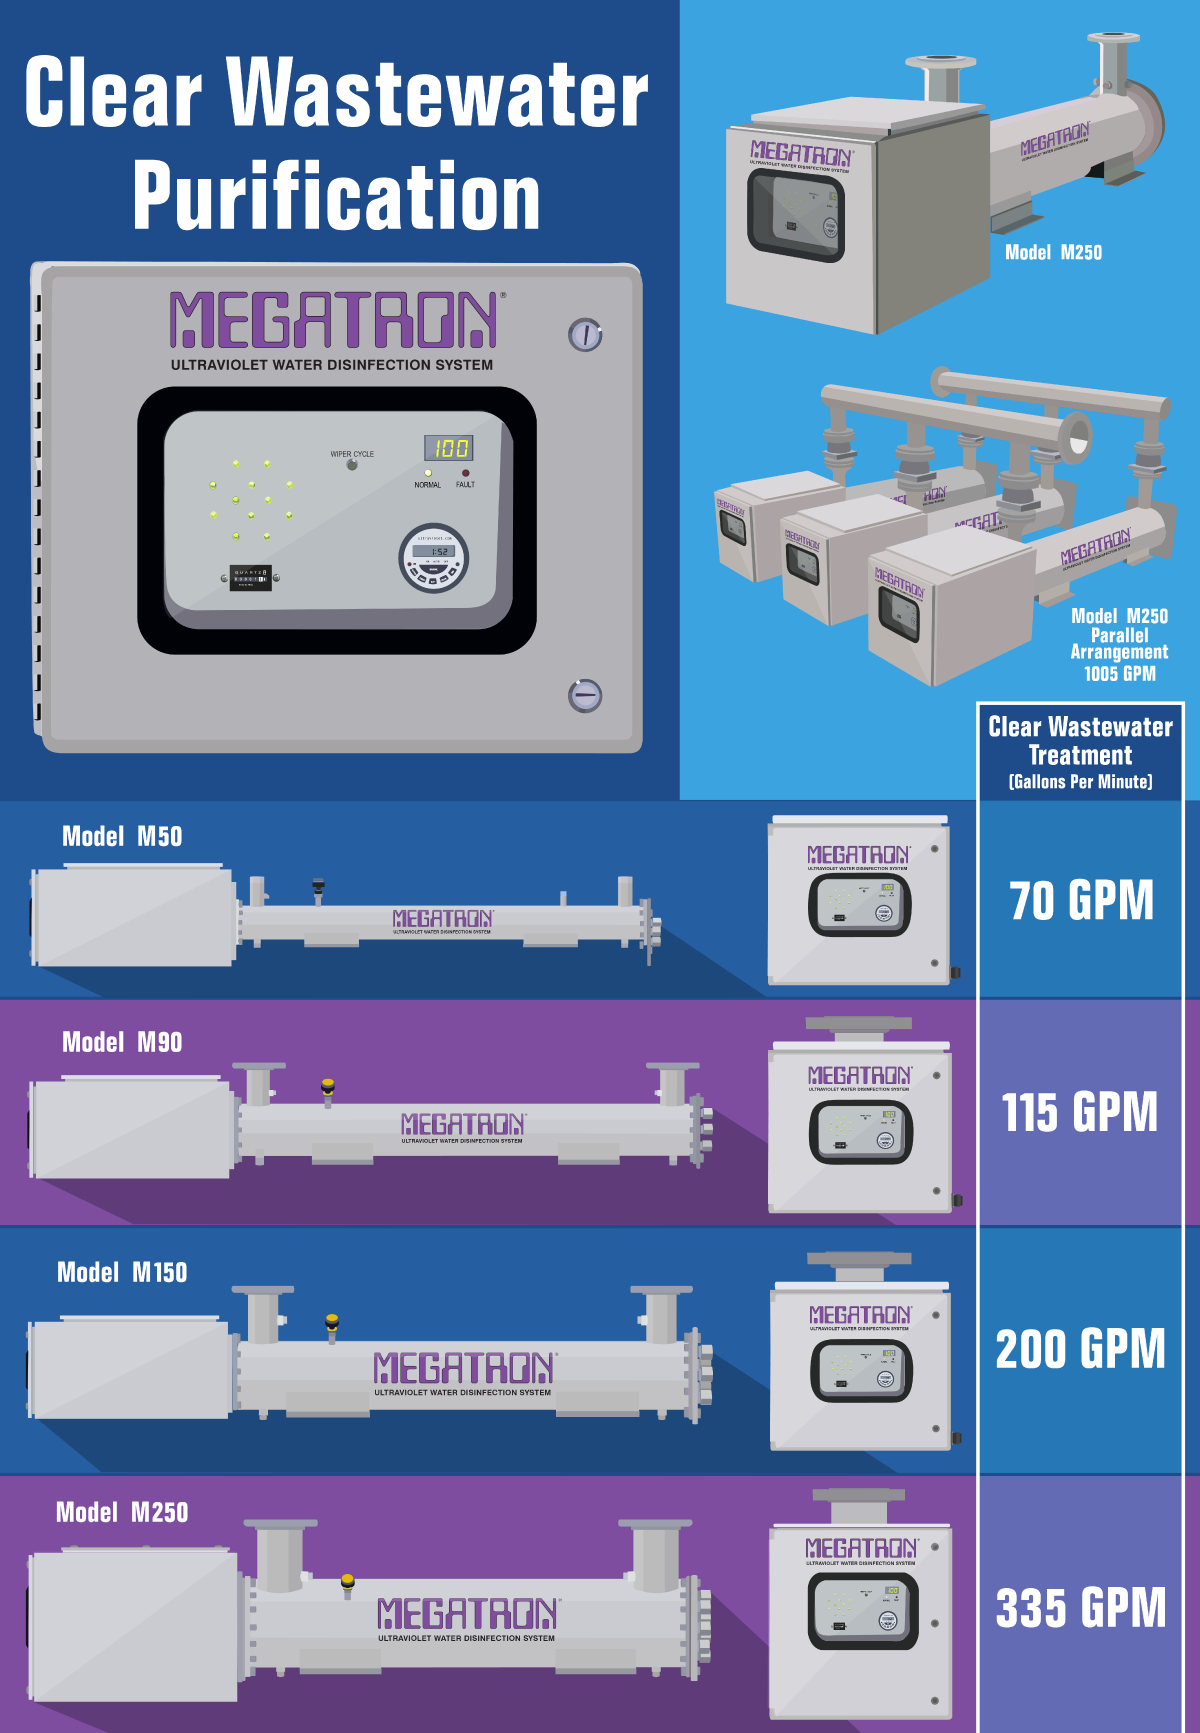 Check Out Our Infographic to See Our MEGATRON Models